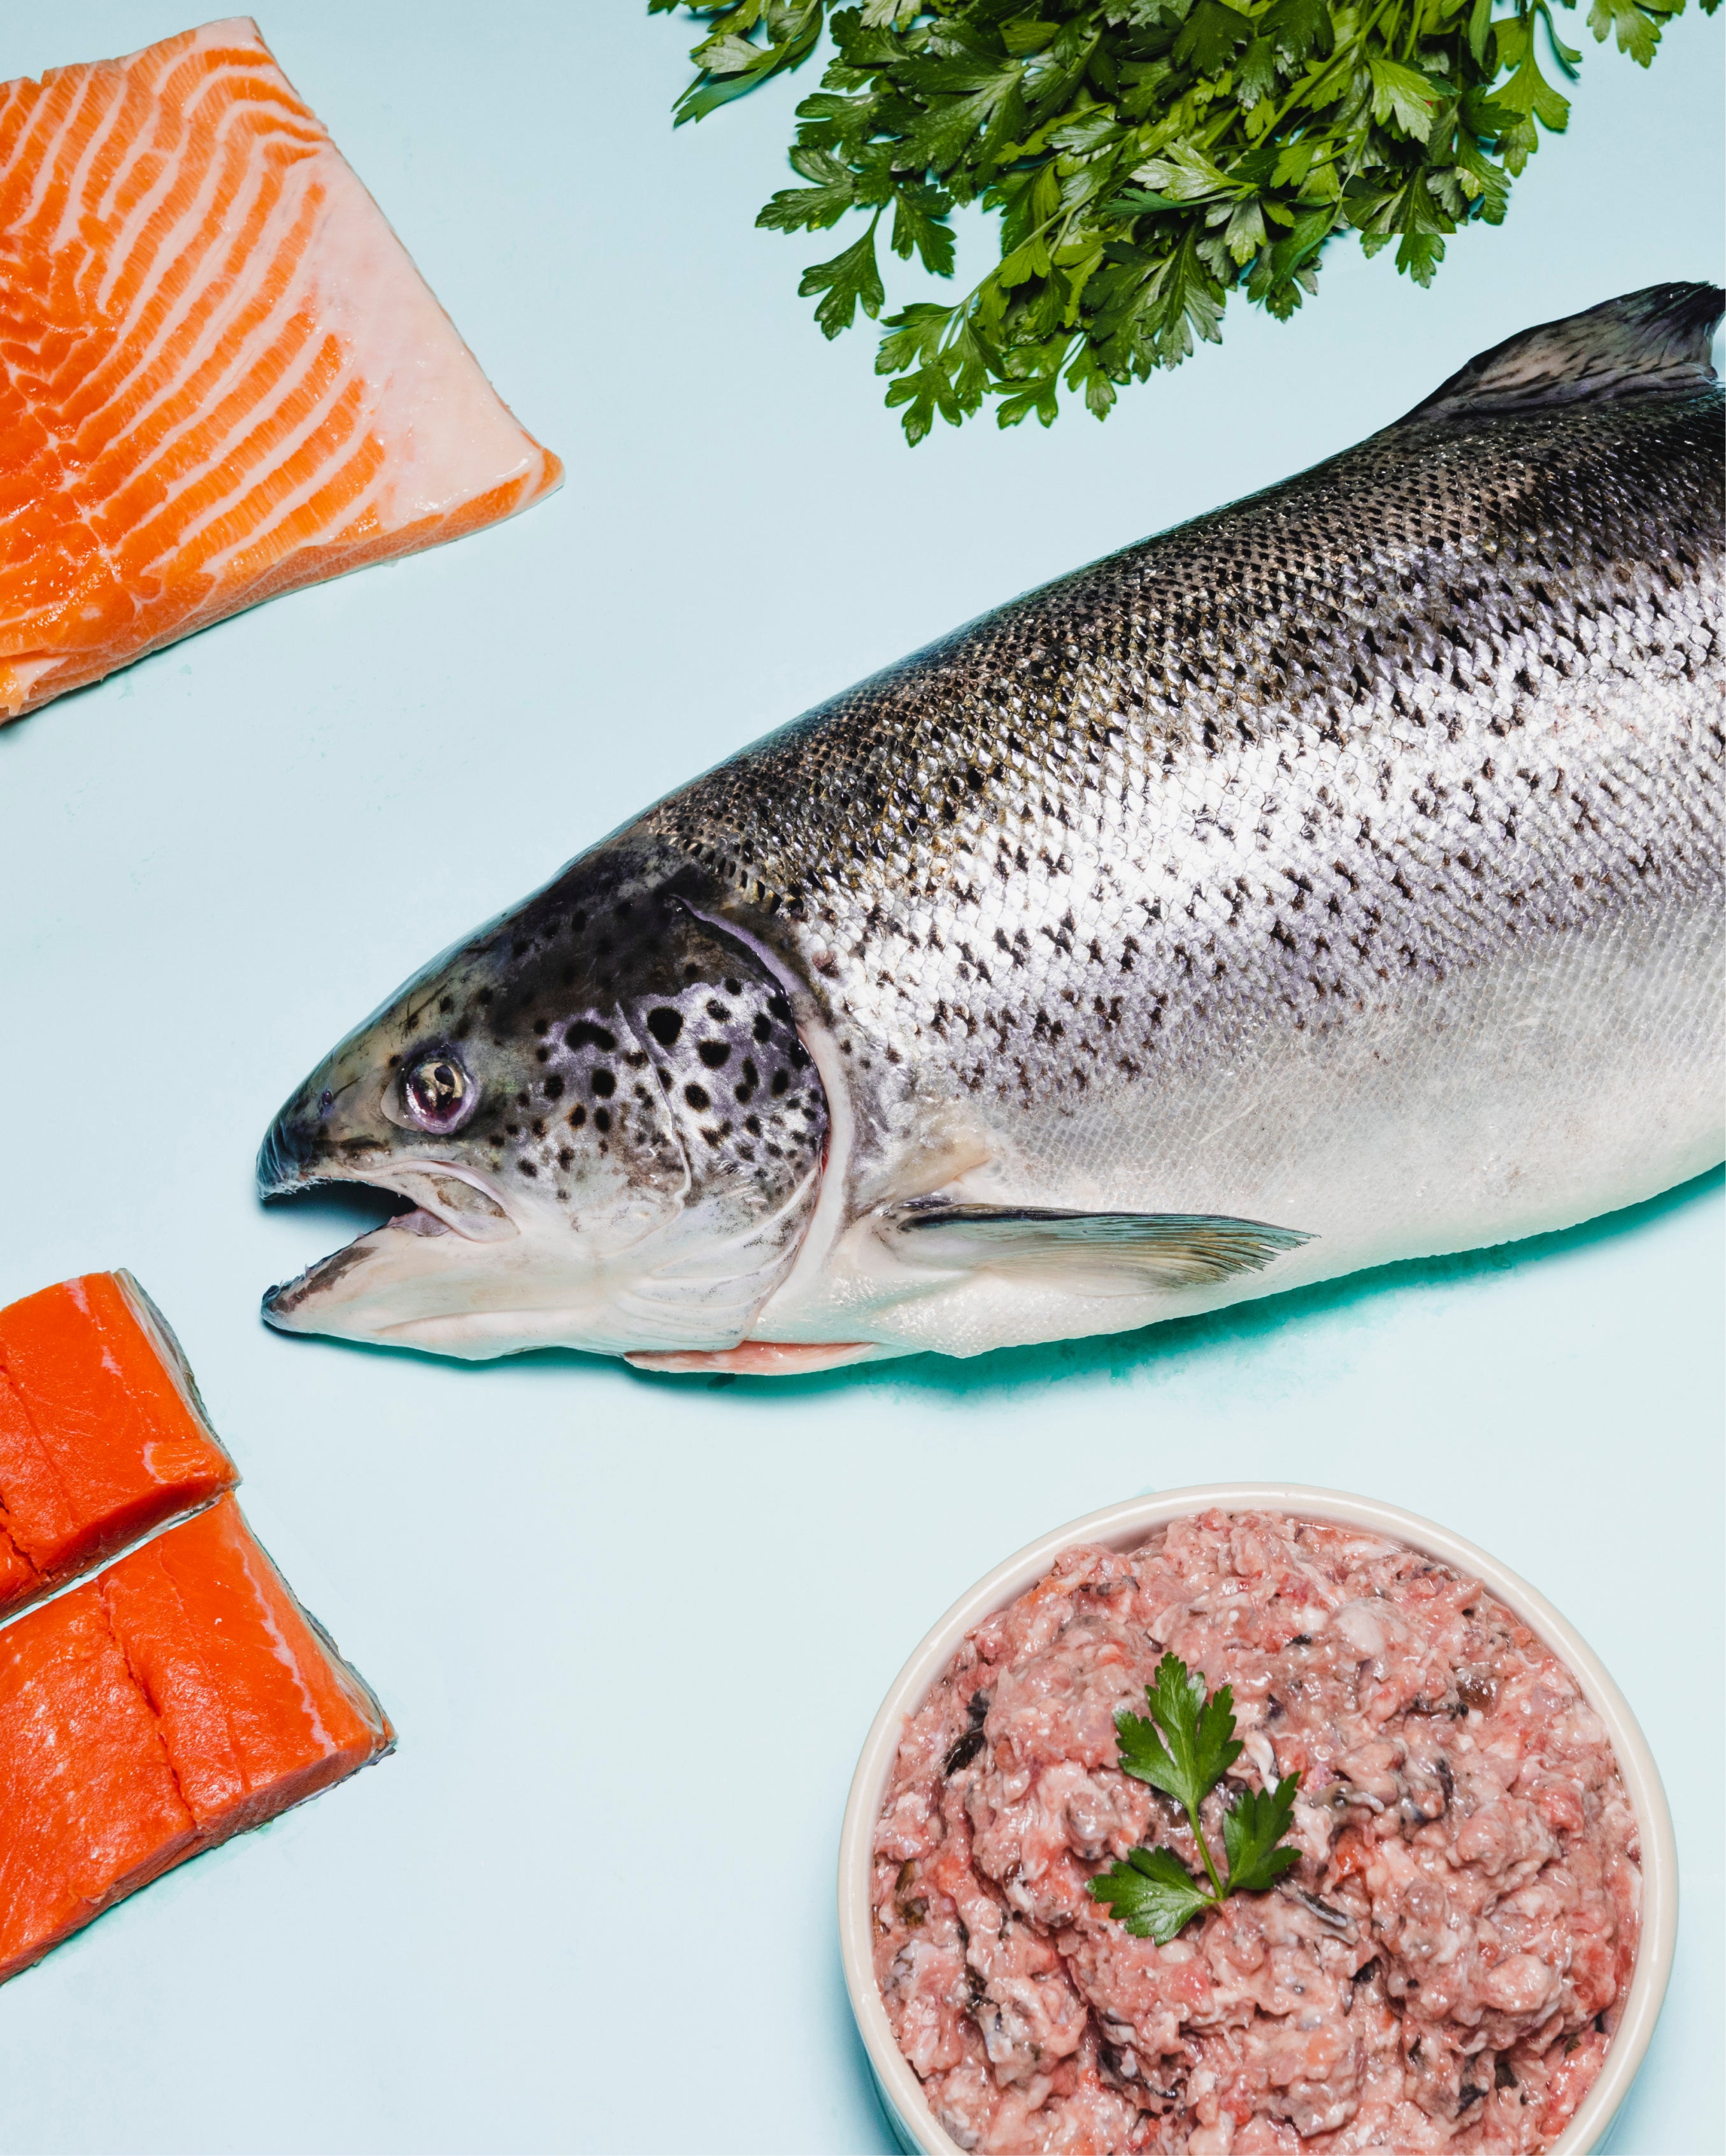 Is Salmon Good for Pets?